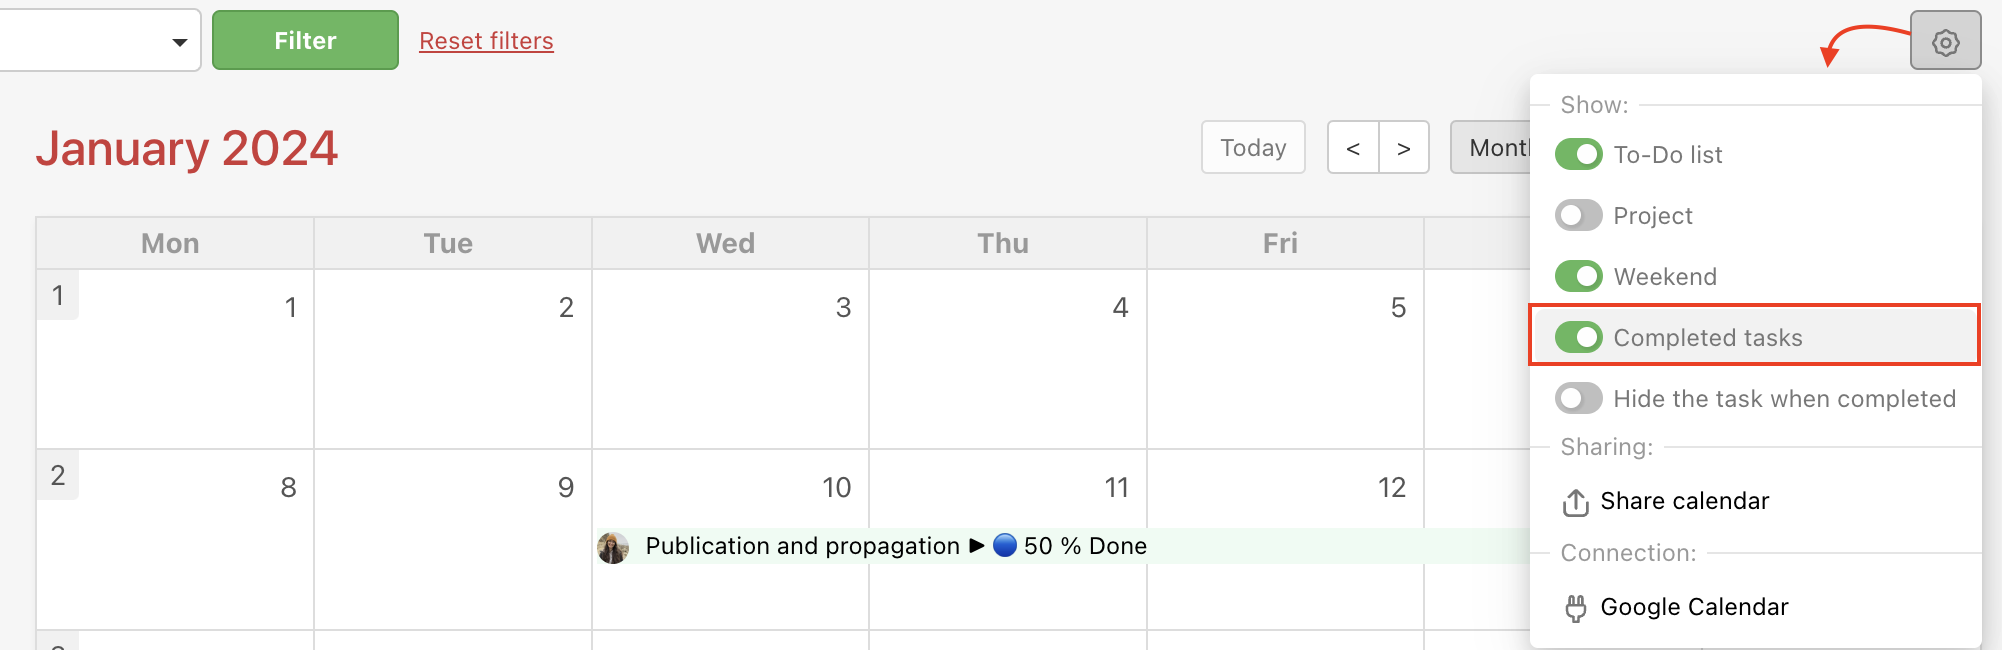 Change the calendar settings for it to show completed tasks too.